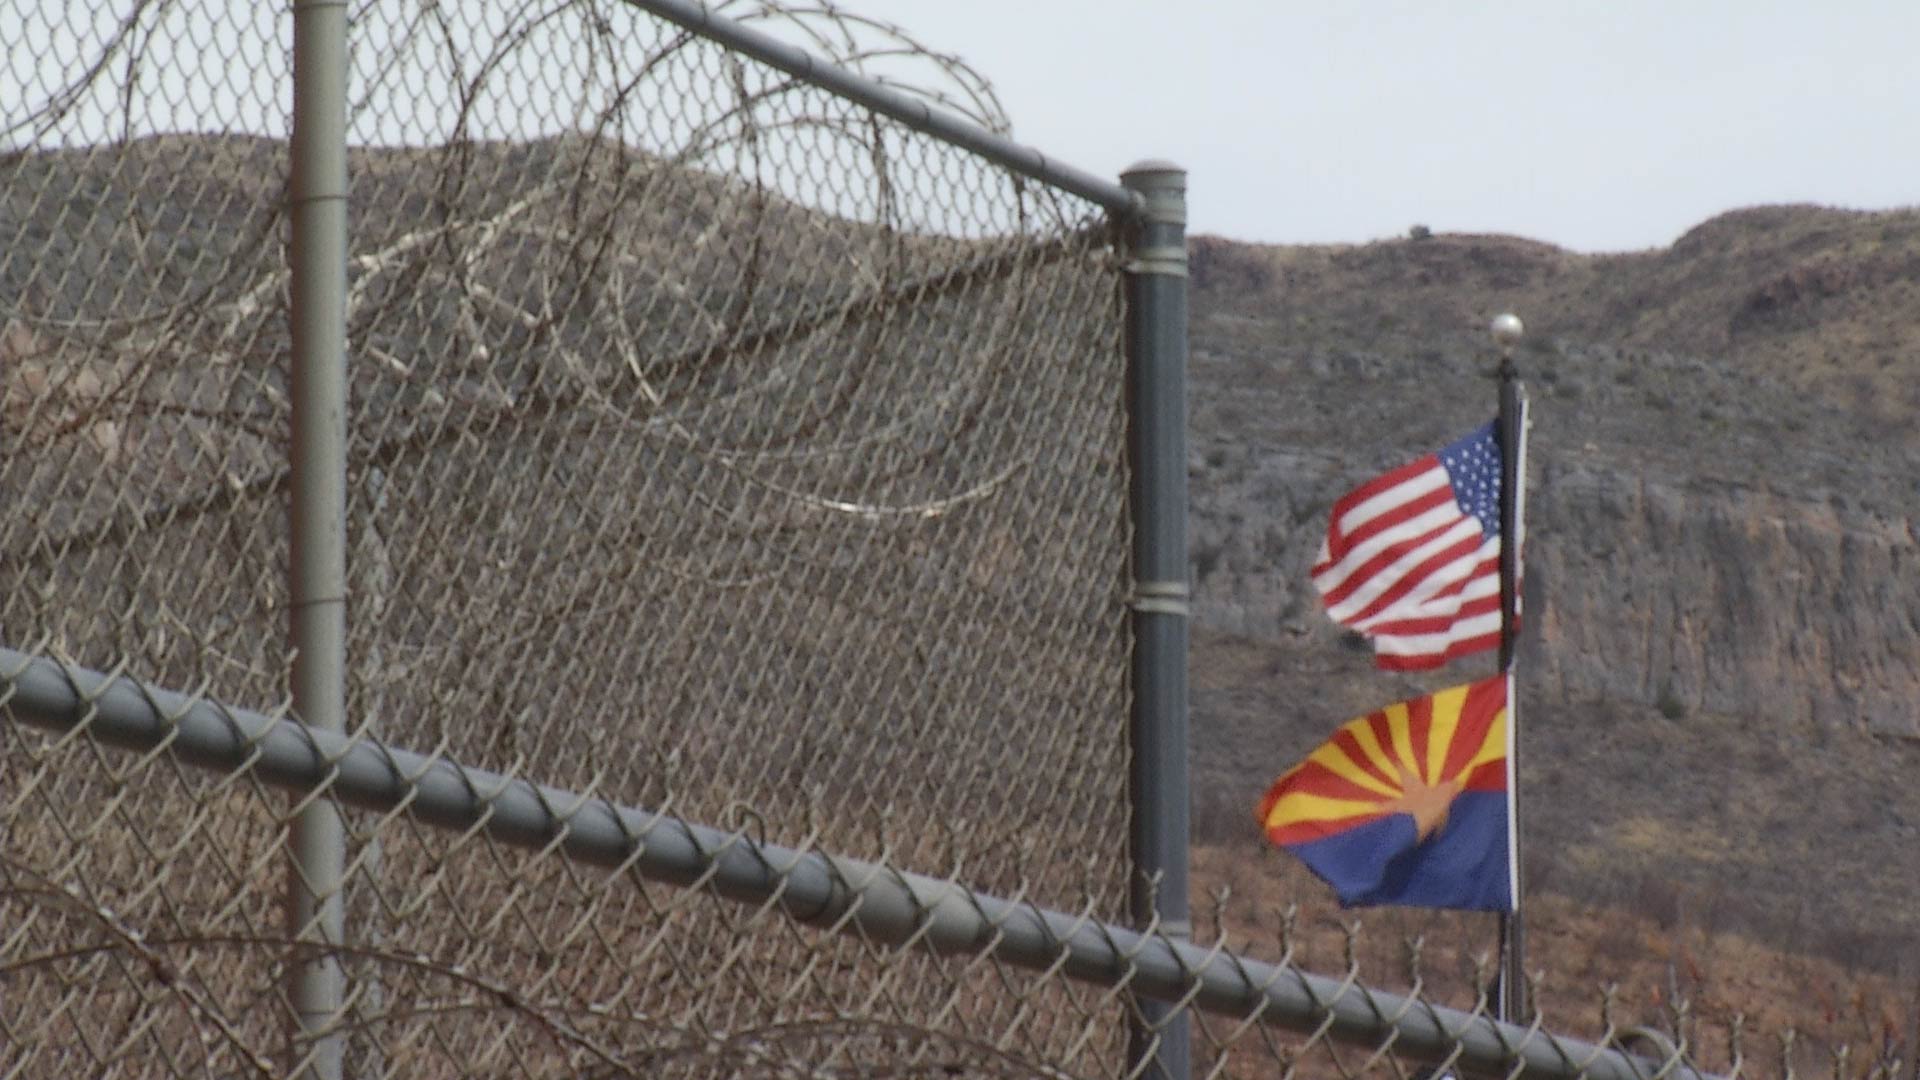 Flags for Arizona and the United States wave in the wind outside the Cochise County Jail.